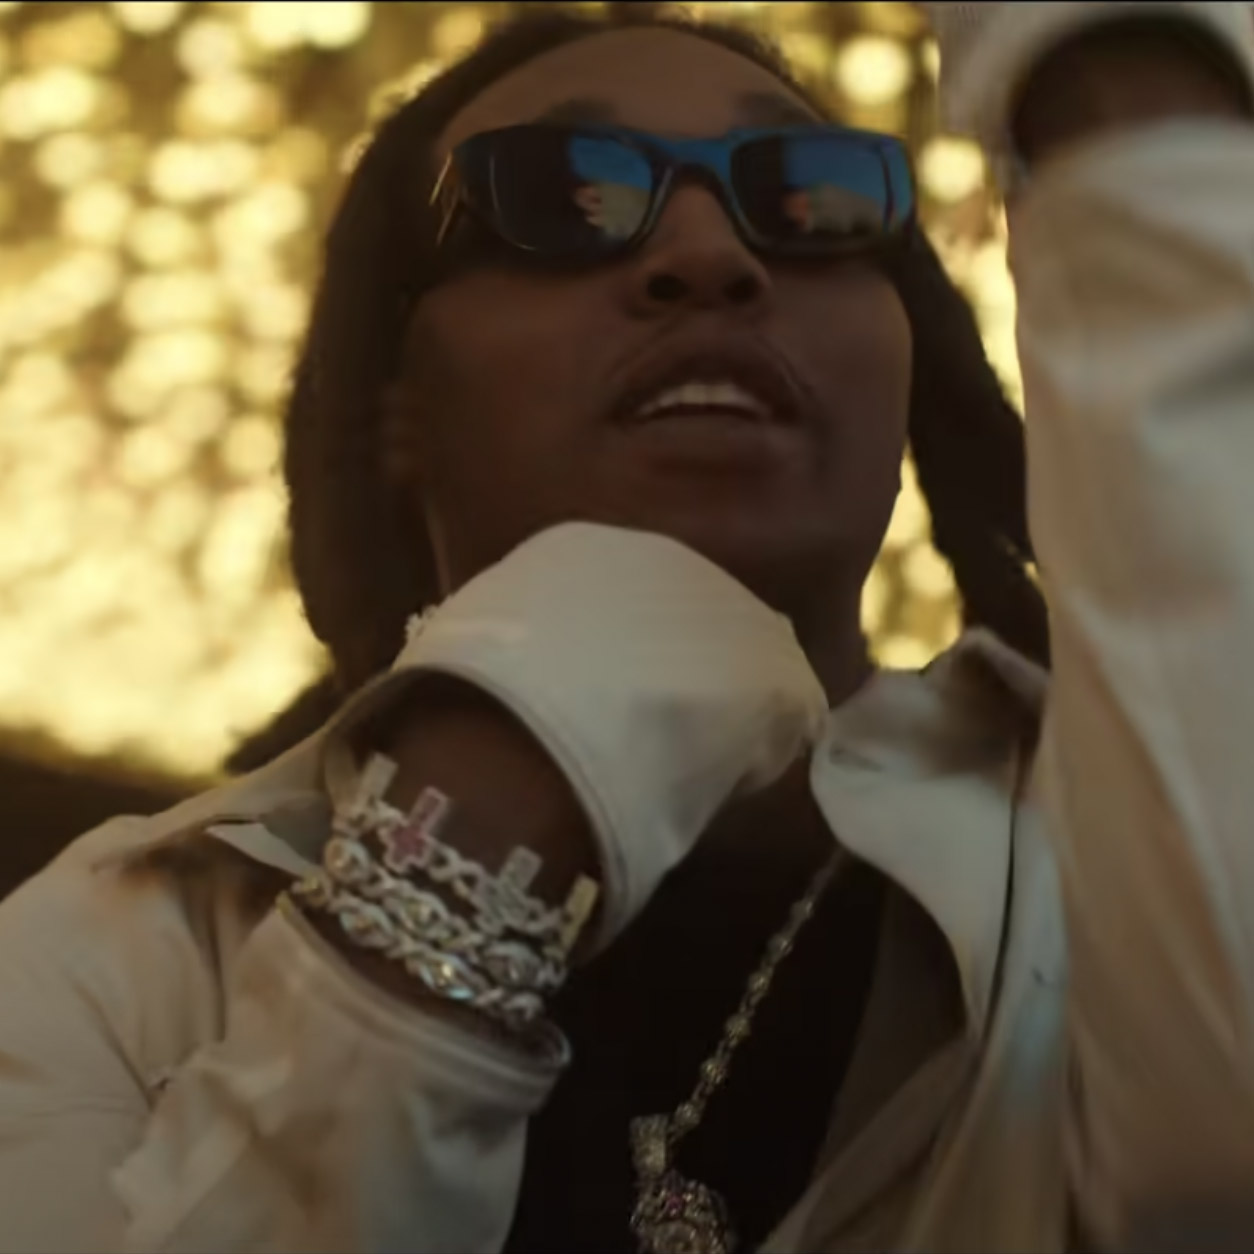 TAKEOFF wearing the thierry lasry sunglasses "VICTIMY"